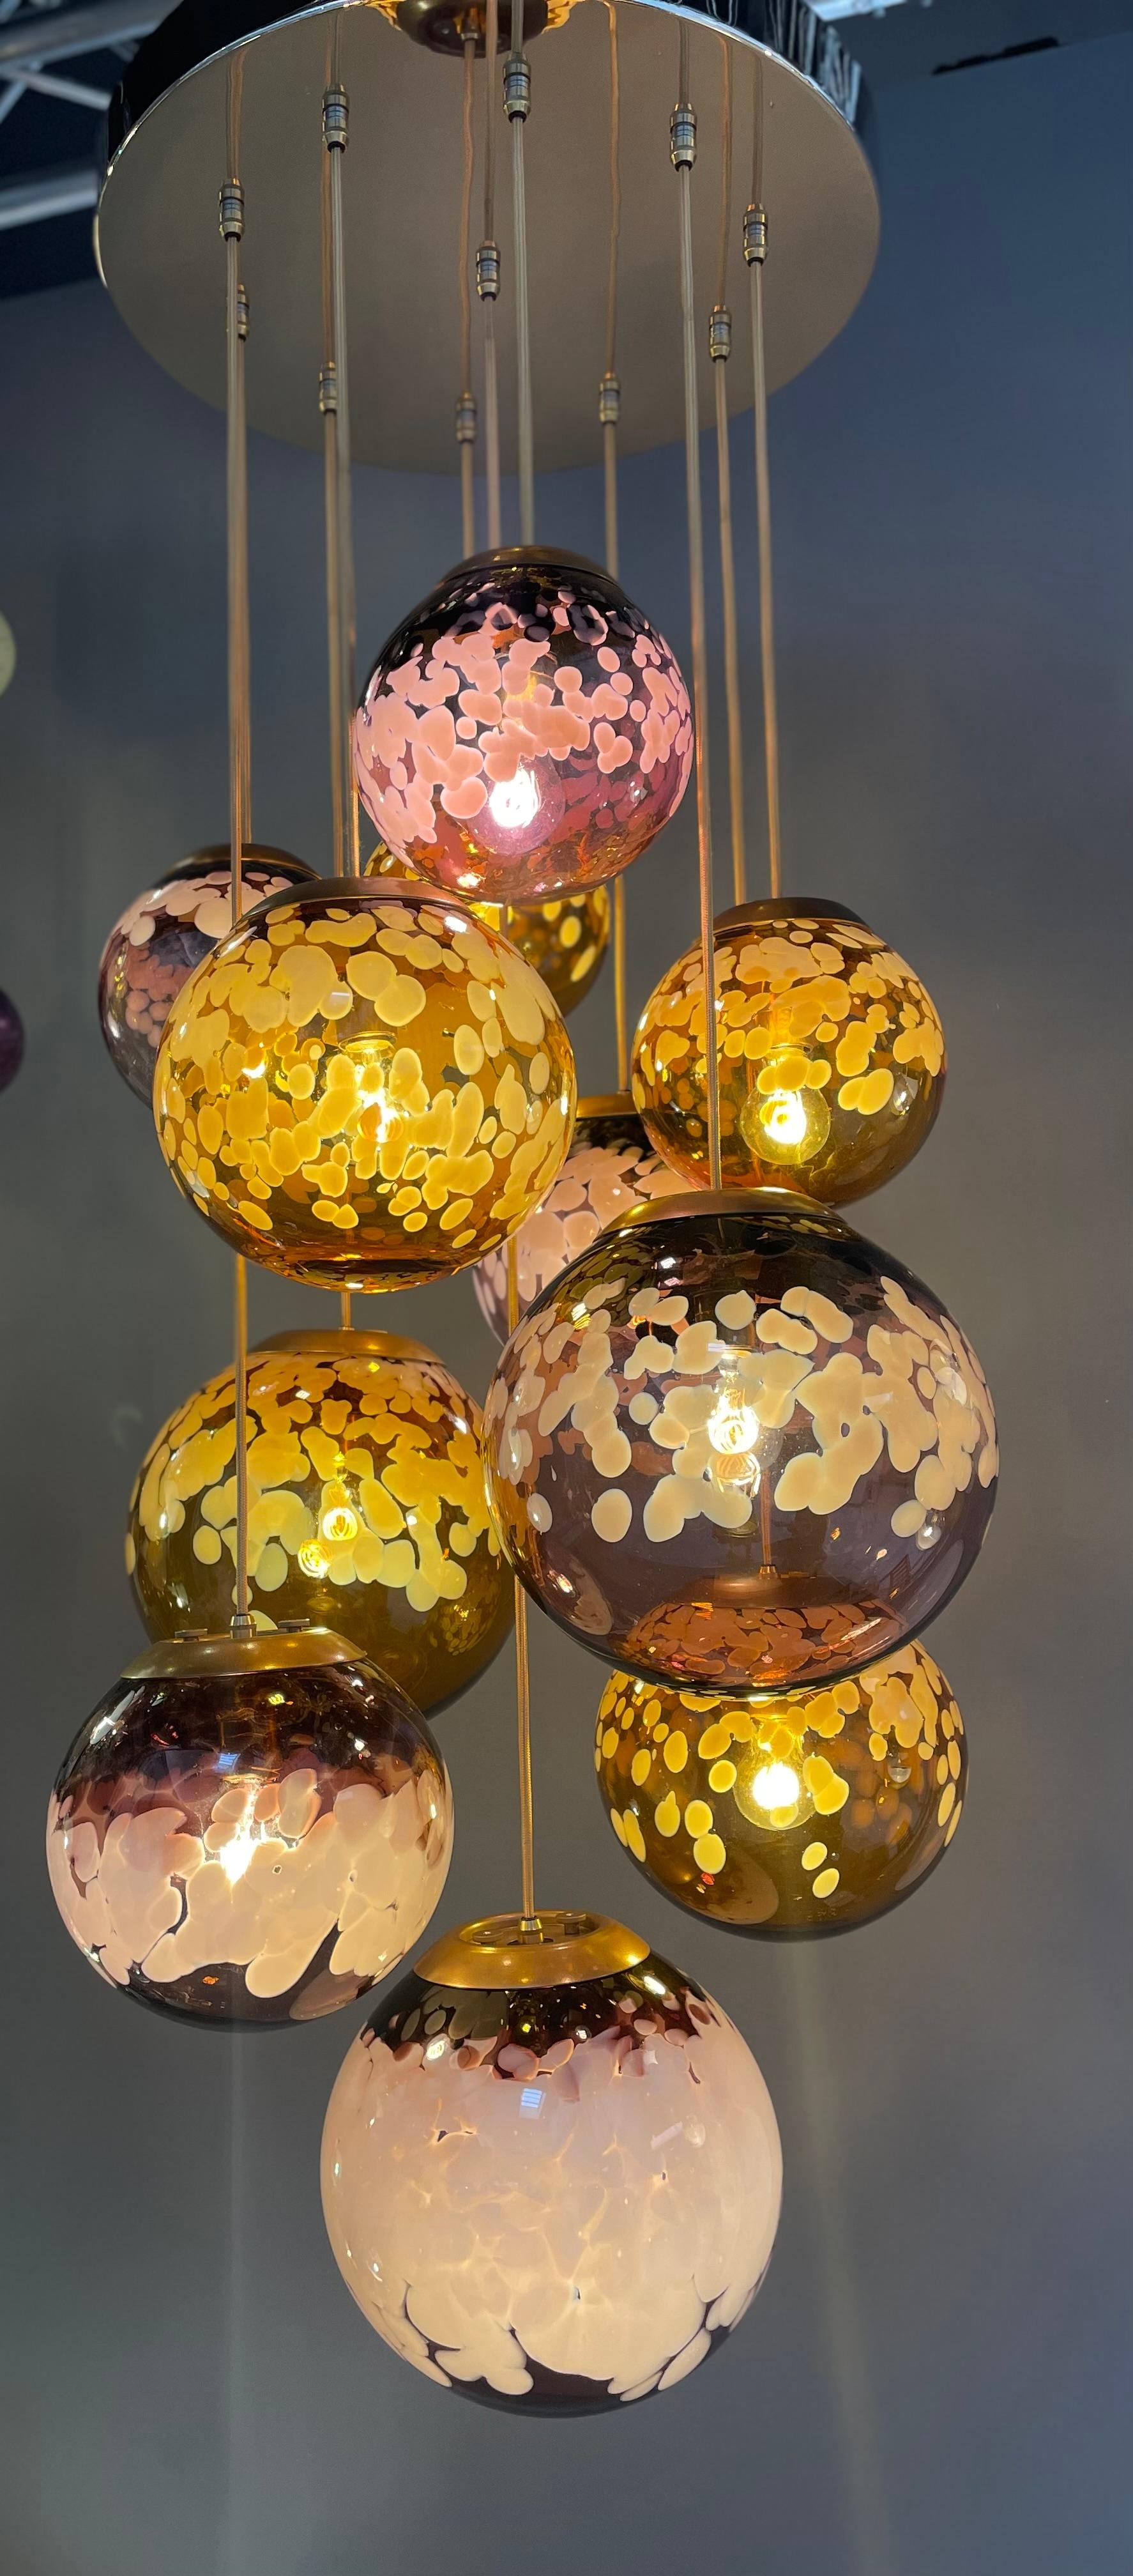 This is a LUNA Chandelier designed by Karen Walker of Roast Designs and features 11 individually illuminated blown glass pendants. The pendants are 20cms, 25cms and 30cms wide and are blown in the UK and the chandelier is designed and hand-crafted